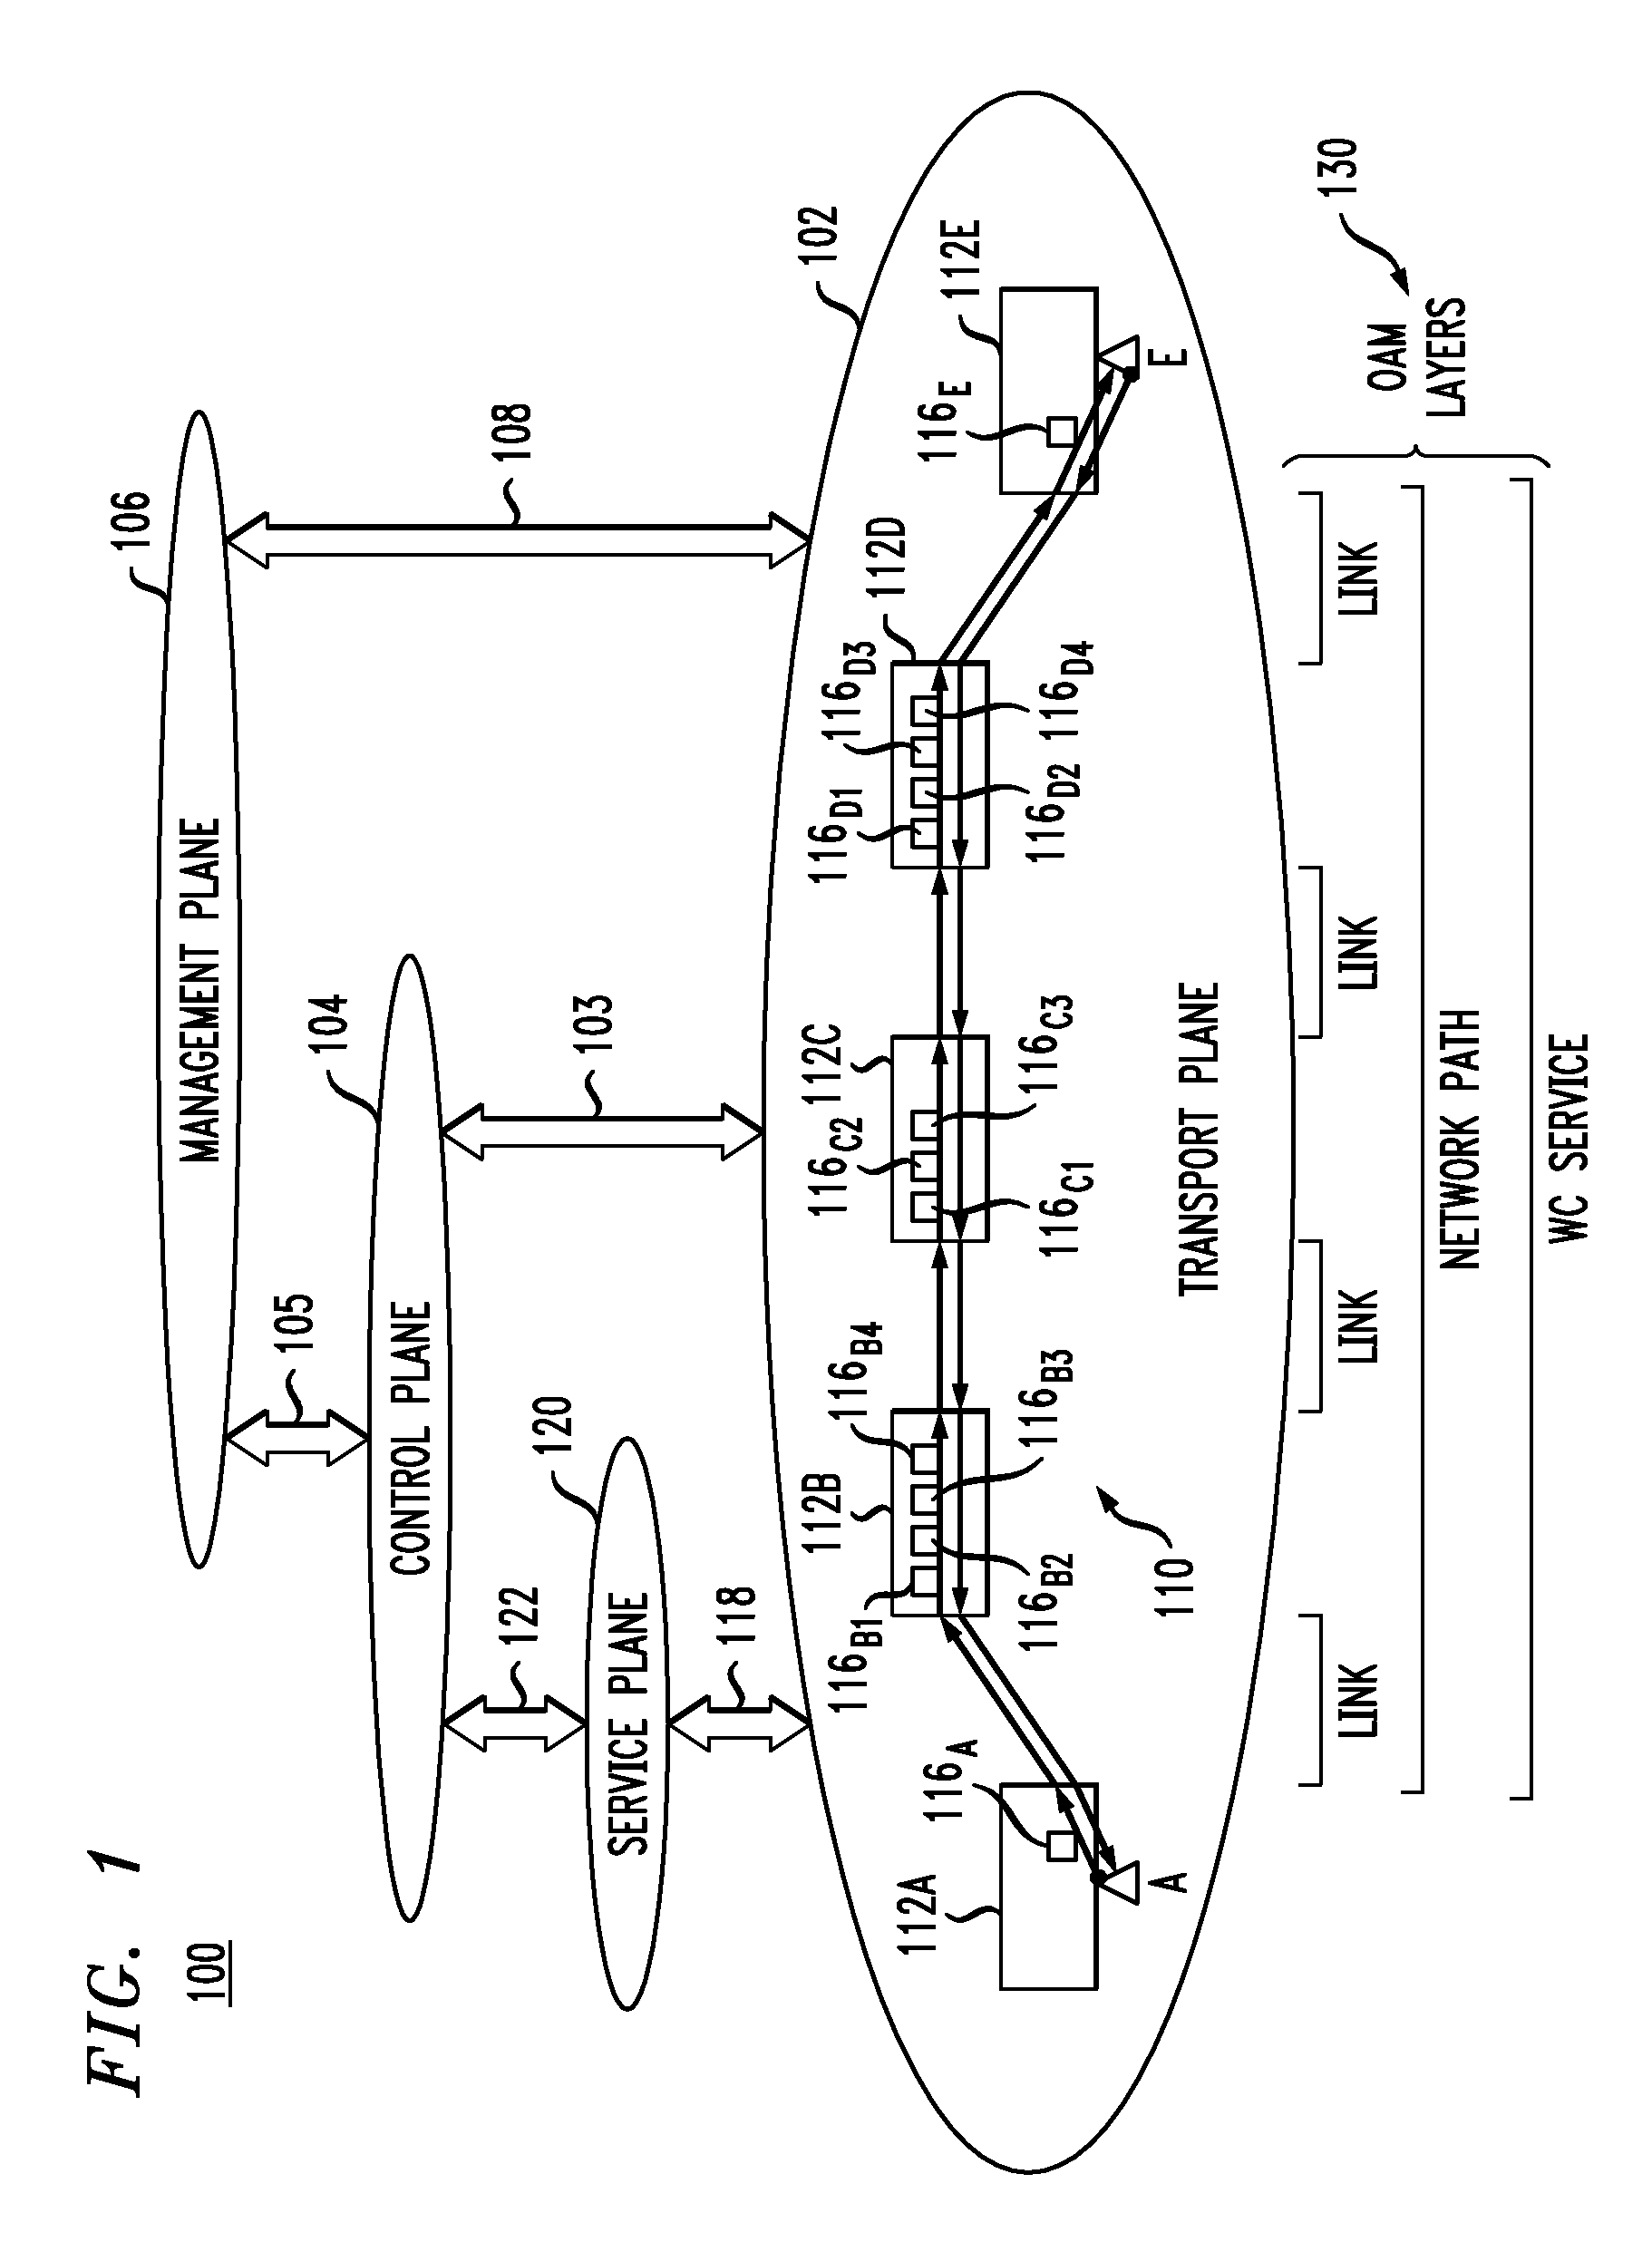 Operations administration and management service for an optical layer of a communication network